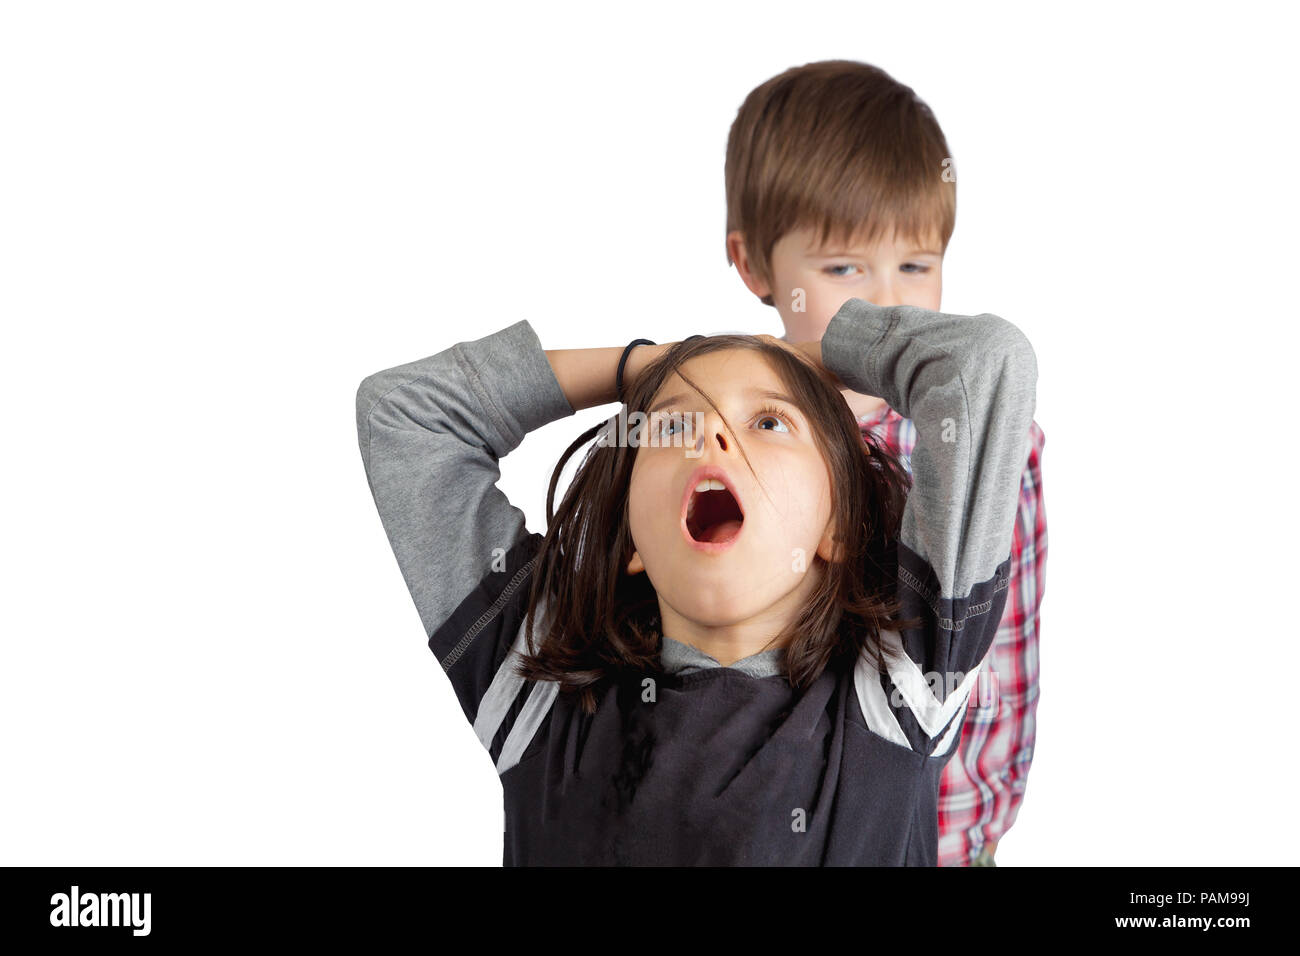 A little brother pulls the hair of his older sister.  He looks sly and mischievous.  She grabs her head with an open mouth look of shock and pain. Stock Photo